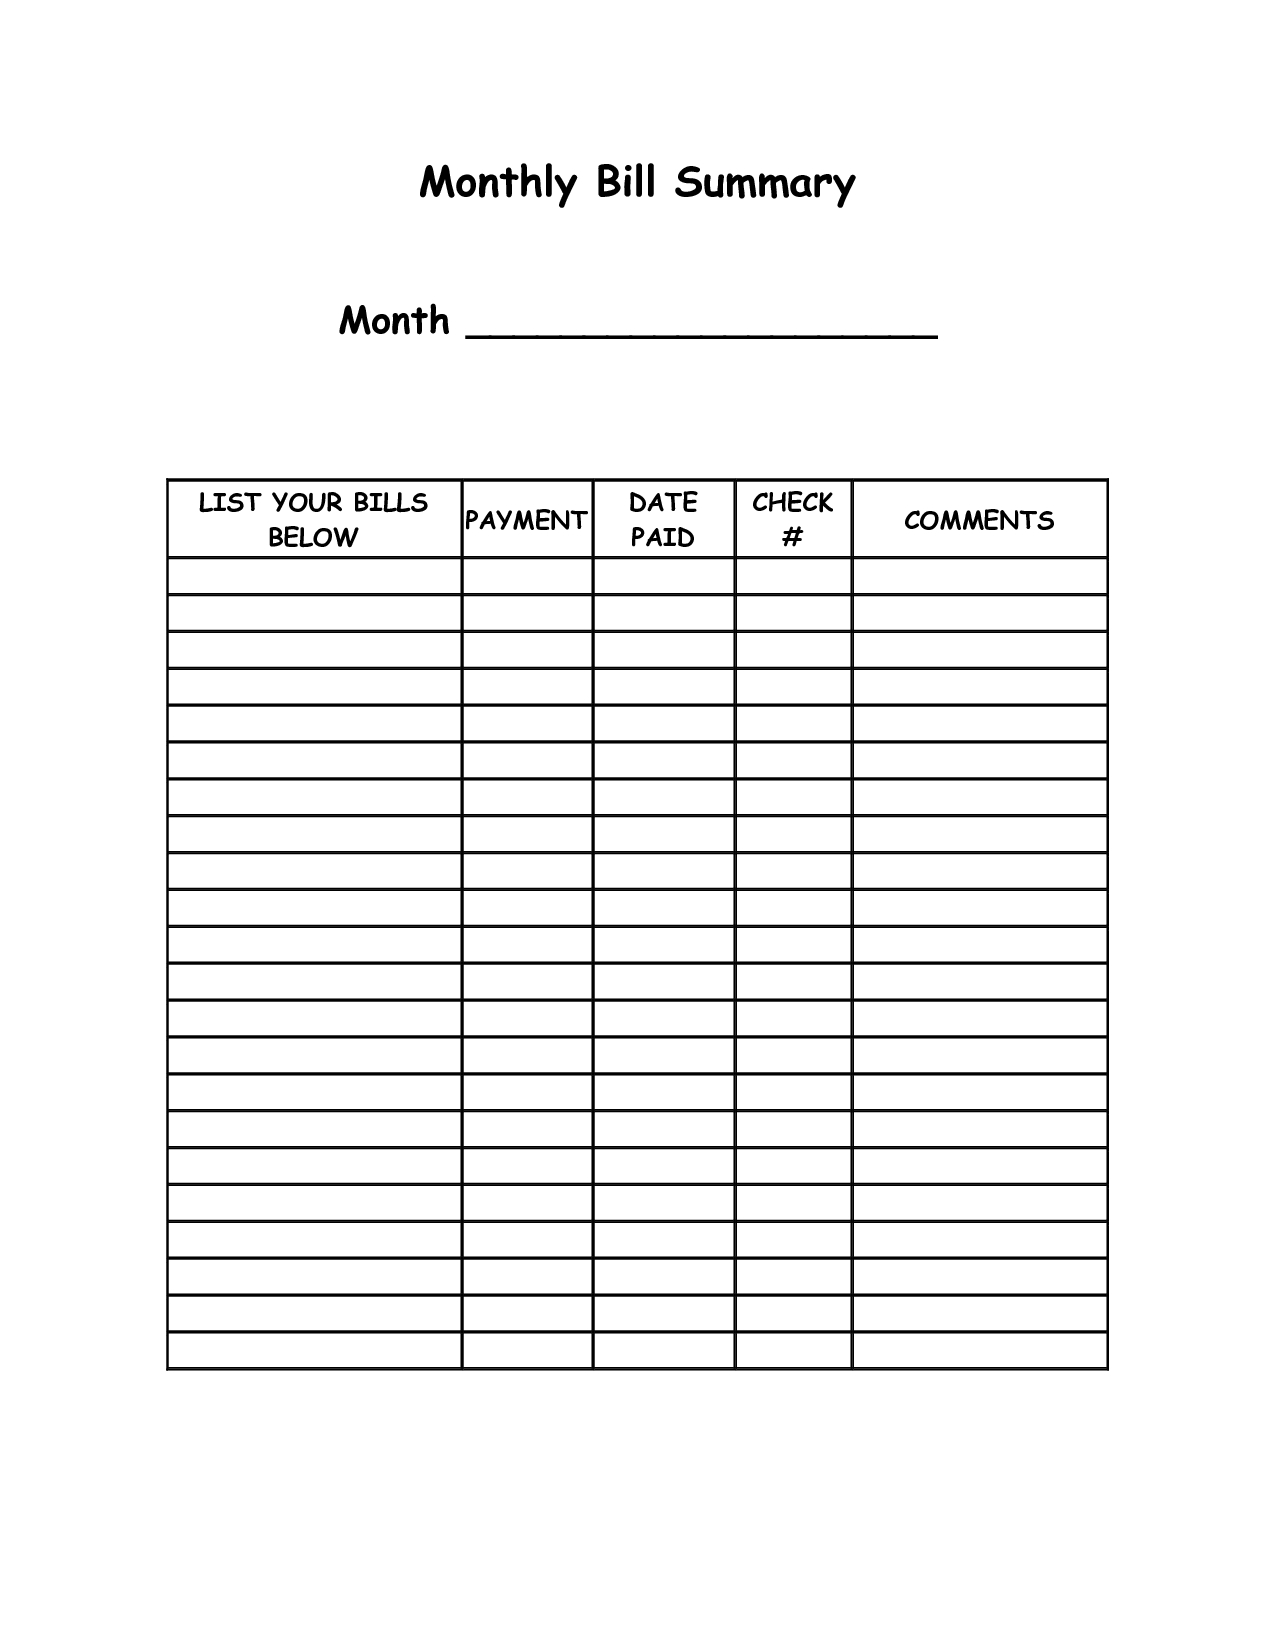 Monthly Bill Summary Doc | Organization | Organizing Monthly Bills intended for Monthly Bills Template With Account Number And Address